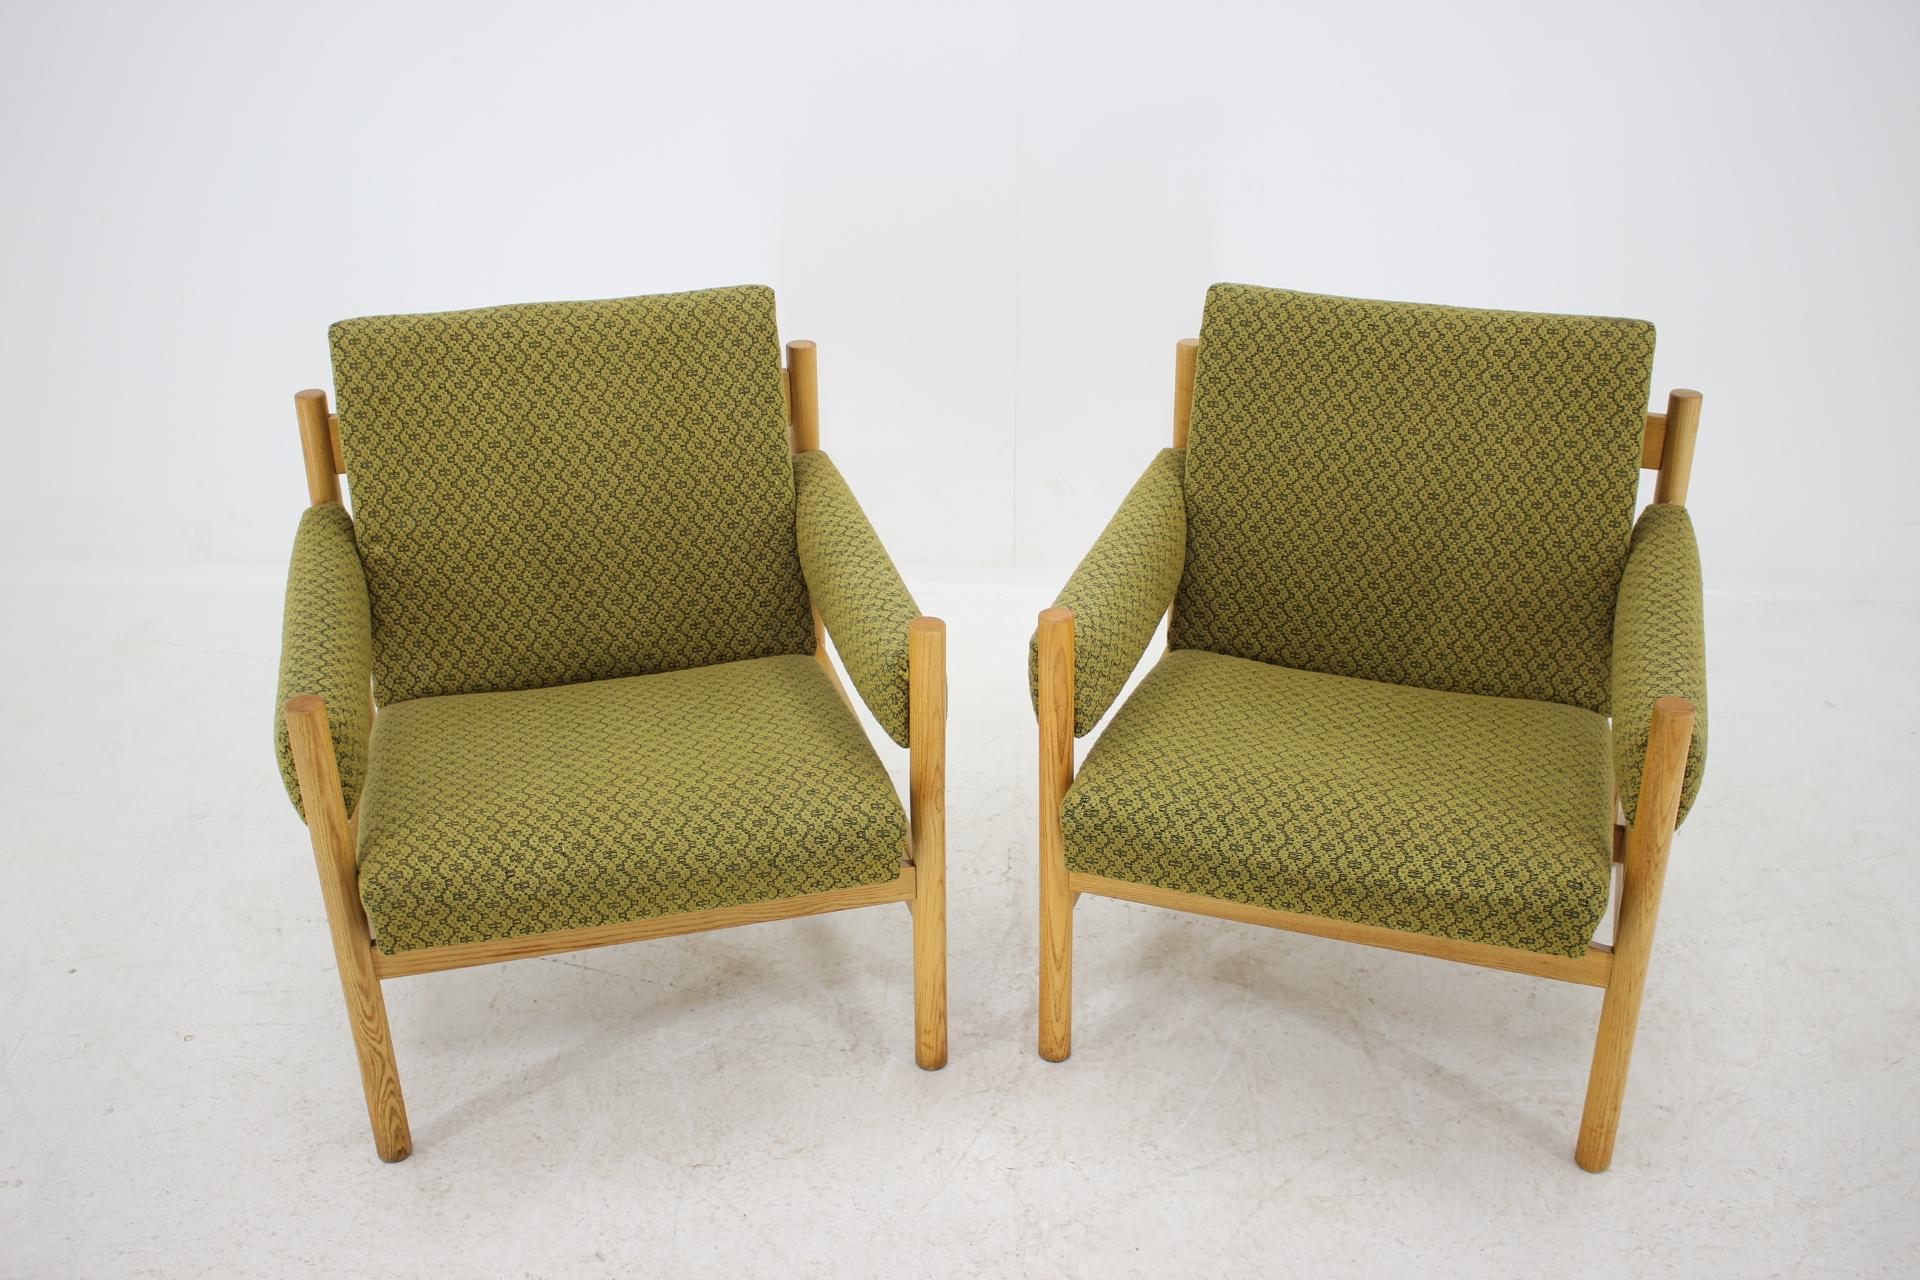 - Made in Czechoslovakia
- Made of wood, fabric
- Maker is Drevotvar Pardubice
- Upholstery is in very good, original condition
- Original condition.